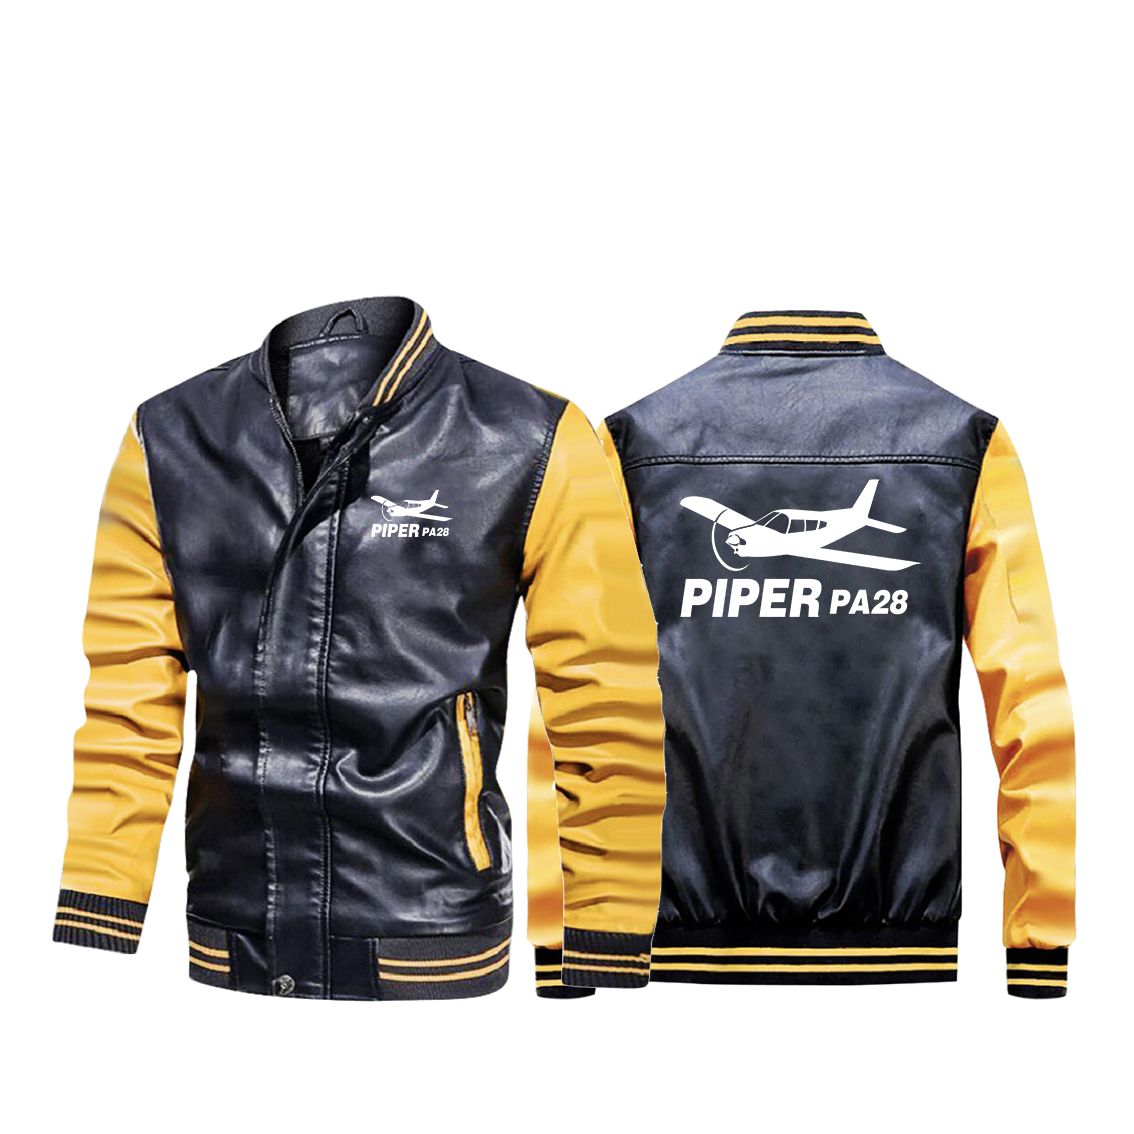 The Piper PA28 Designed Stylish Leather Bomber Jackets